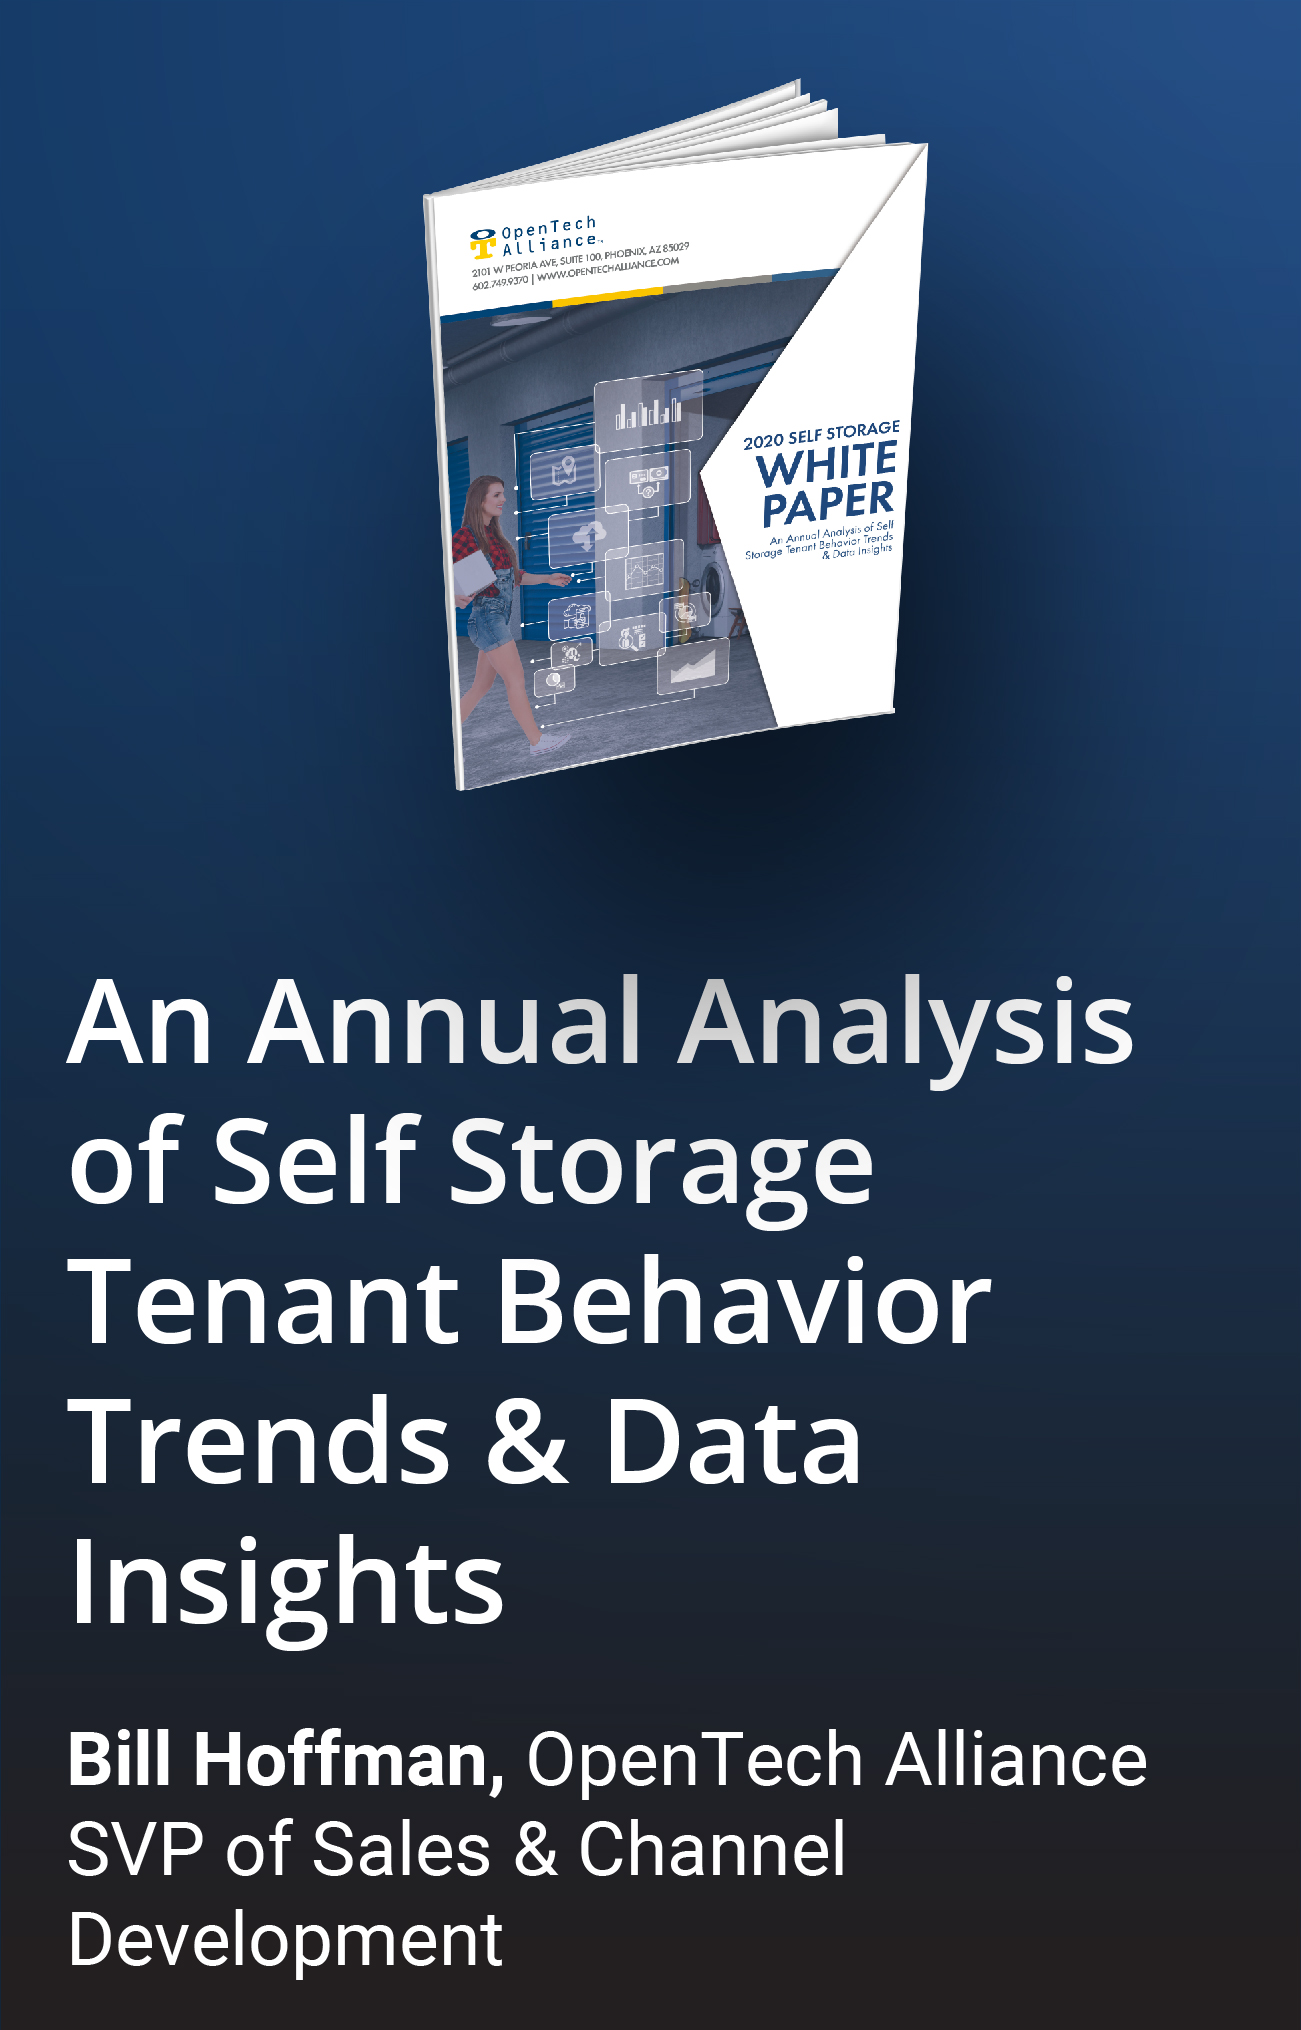 An Annual Analysis of Self Storage Tenant Behavior Trends & Data Insights-01